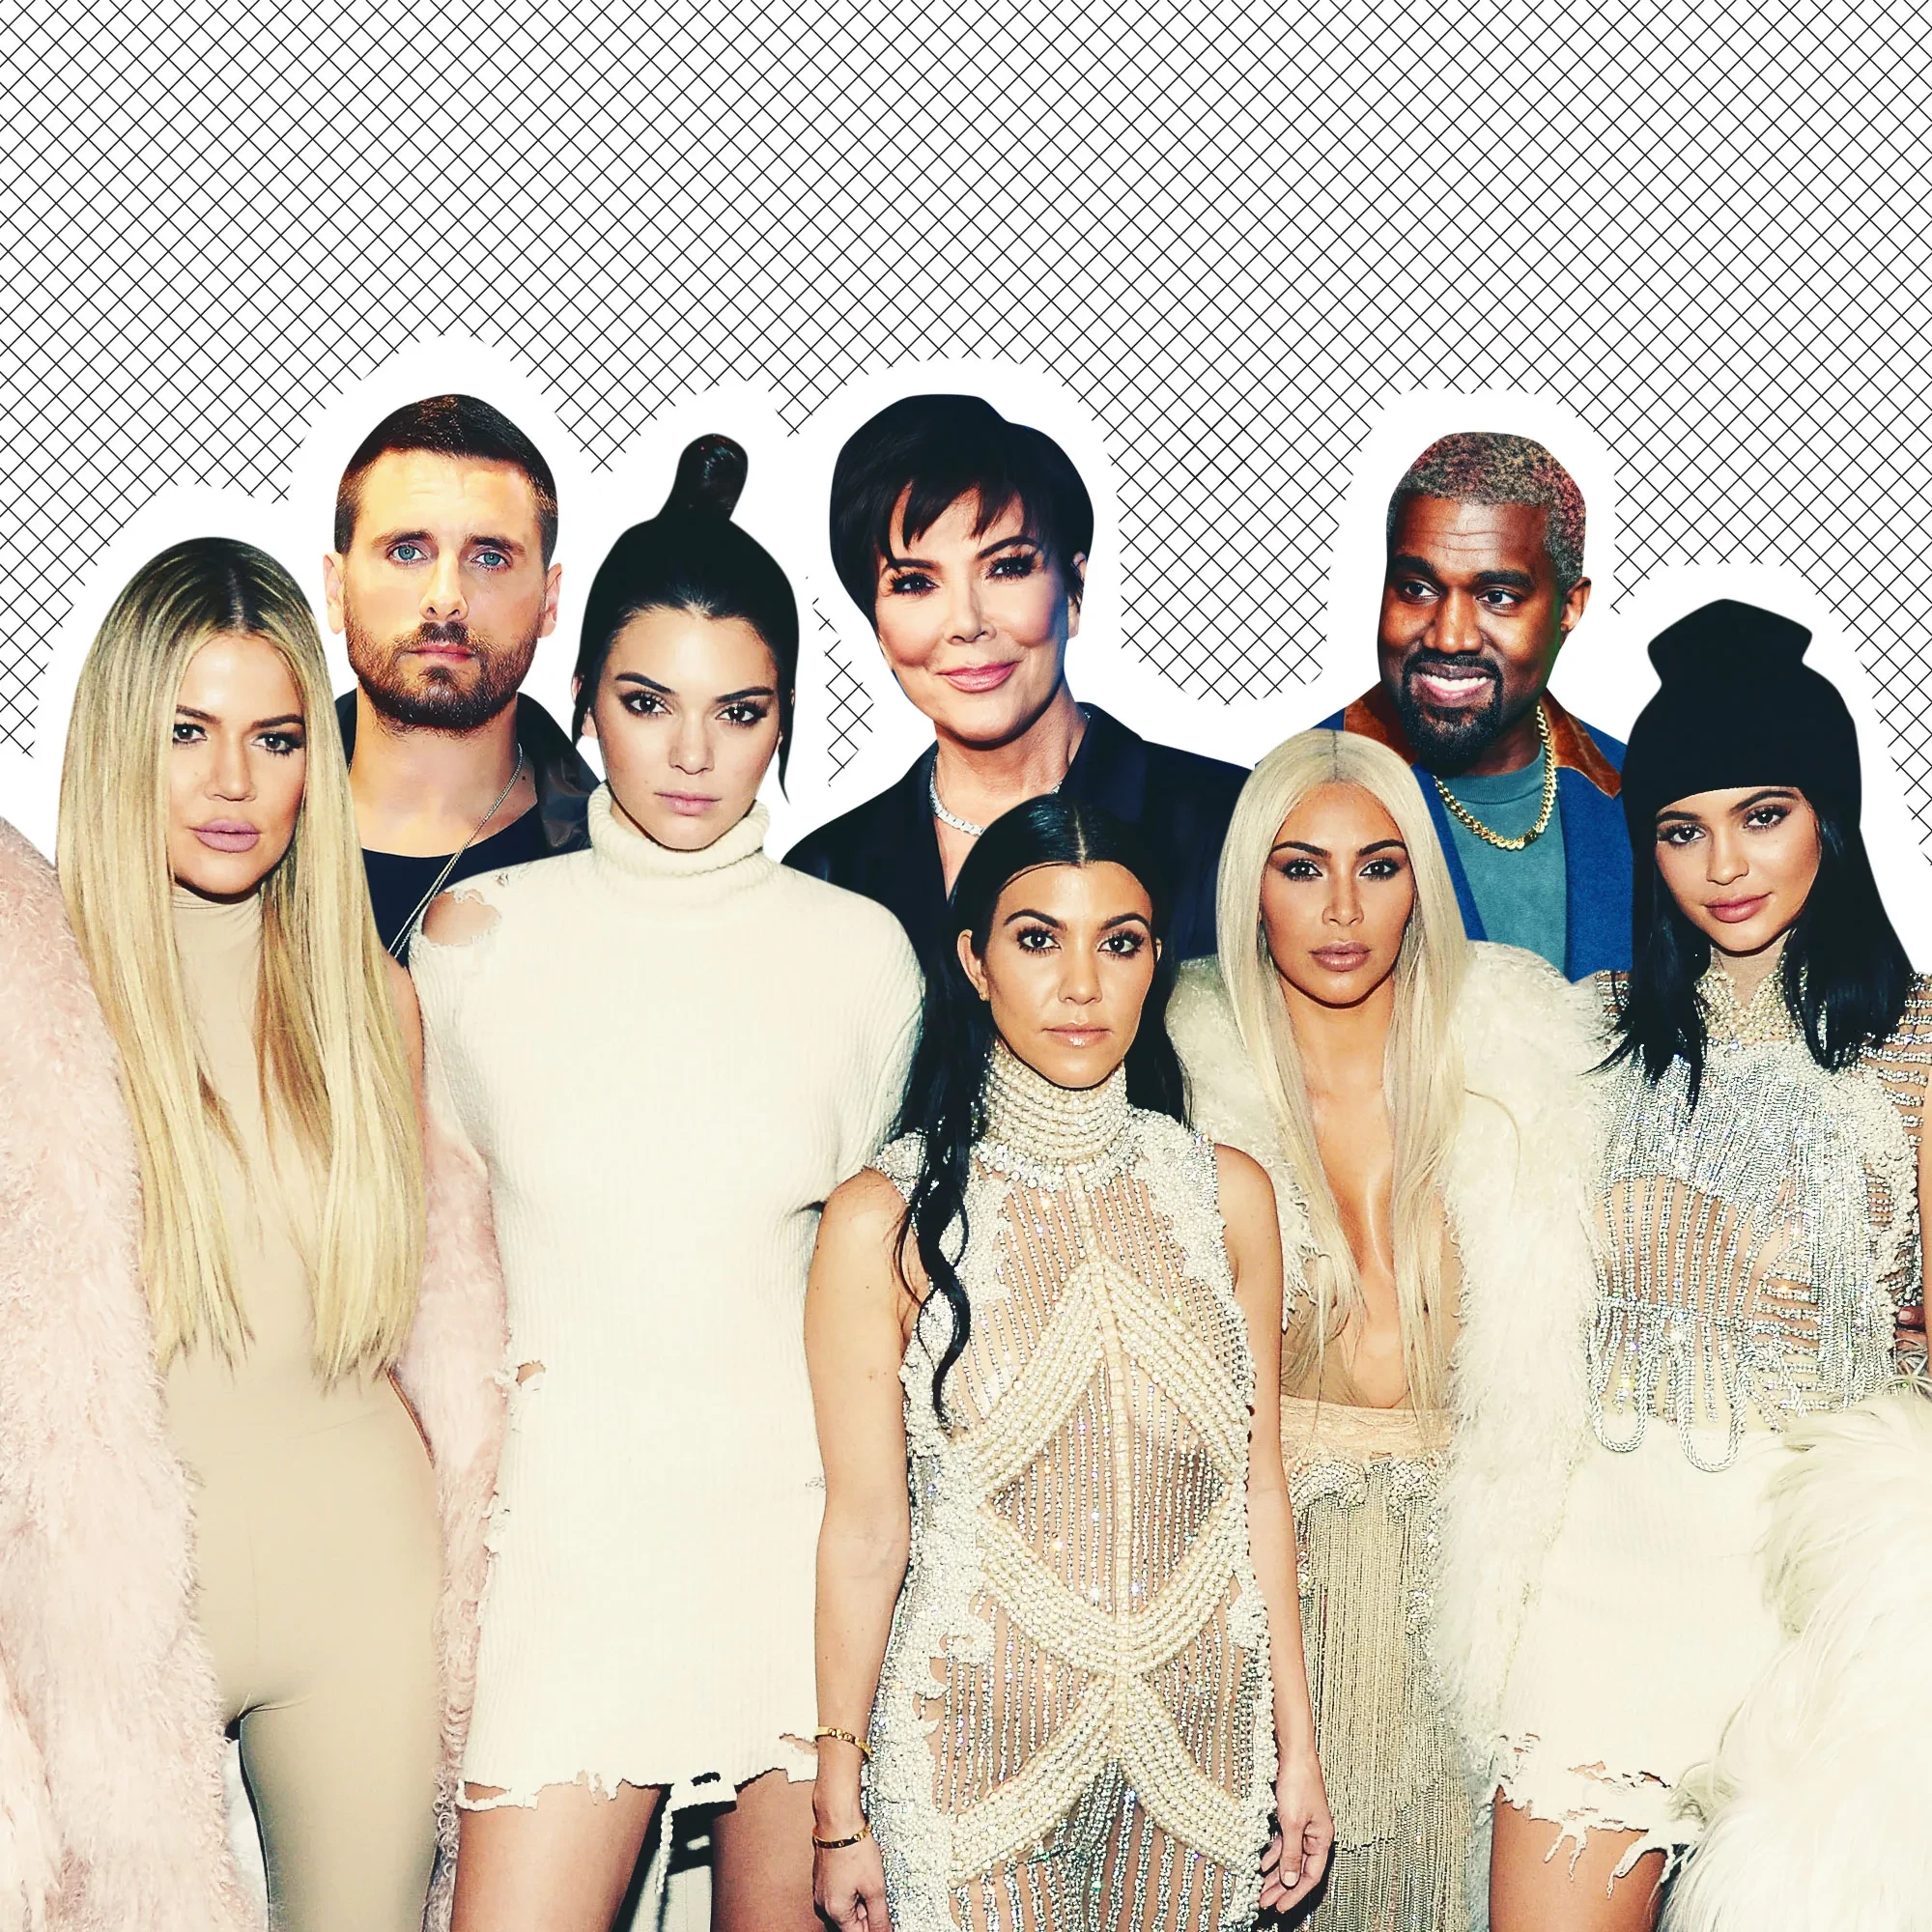 Kardashian Ages In Order From Youngest To Oldest